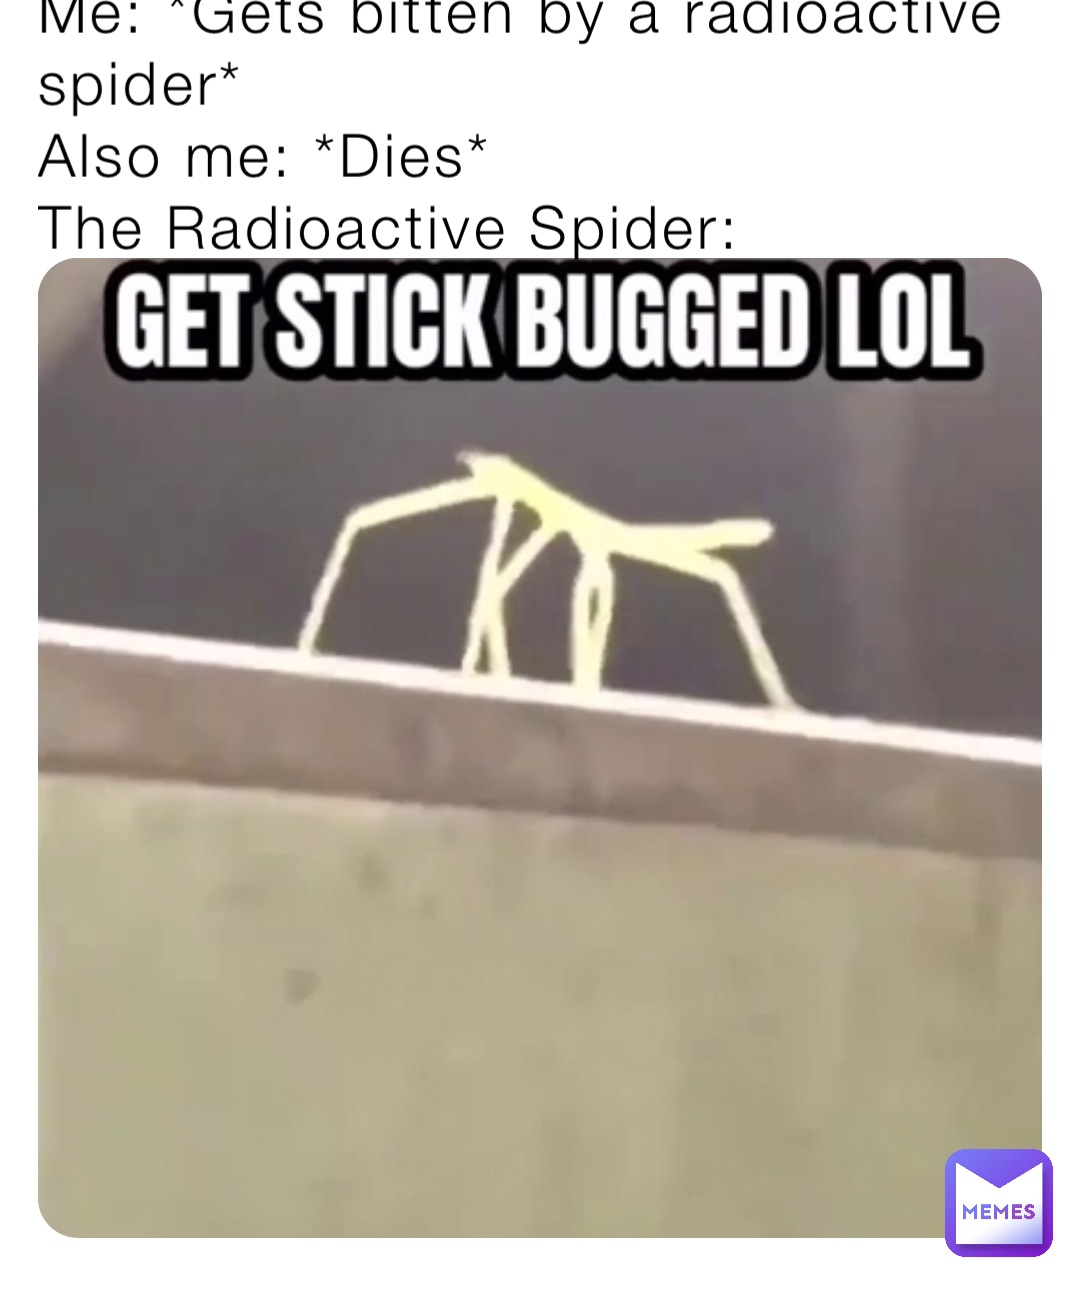 Me: *Gets bitten by a radioactive spider*
Also me: *Dies*
The Radioactive Spider: